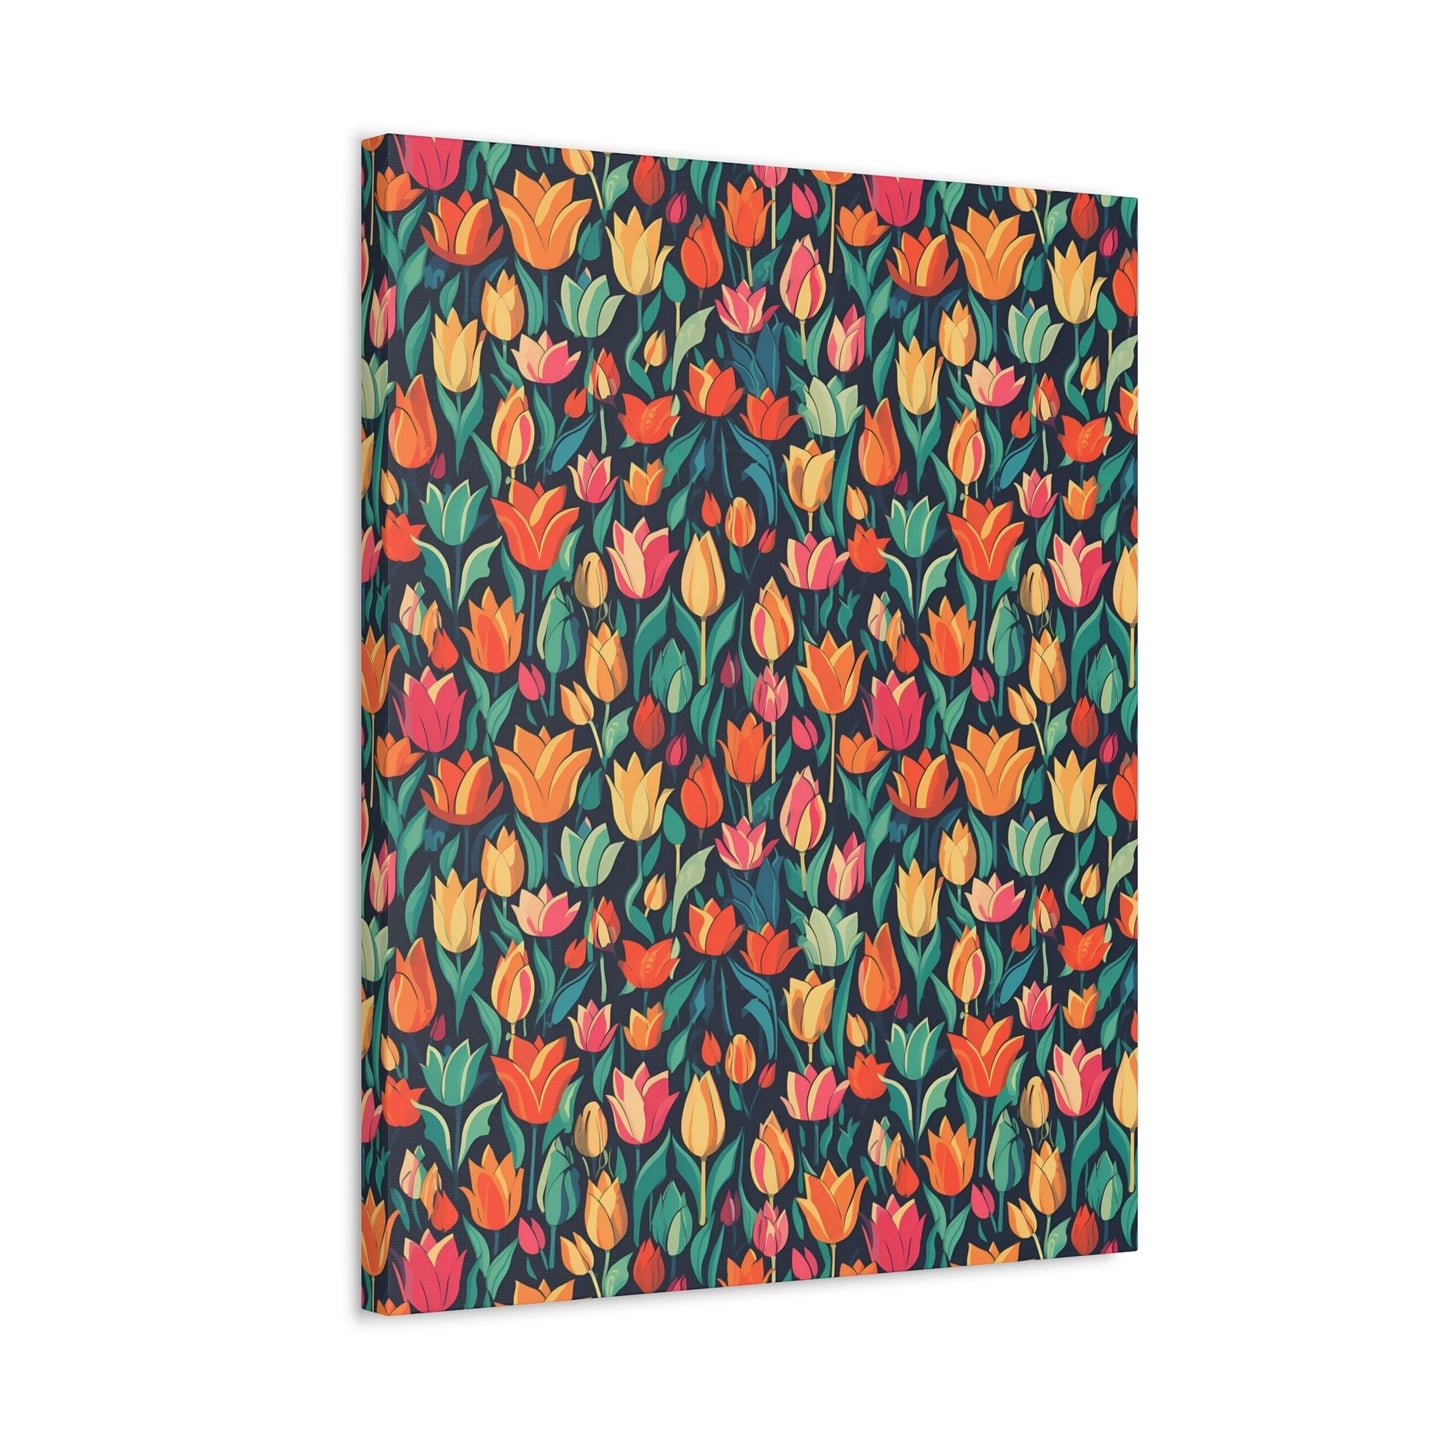 Tulip Medley - Vibrant and Colourful Wall Art Canvas - Pattern Symphony